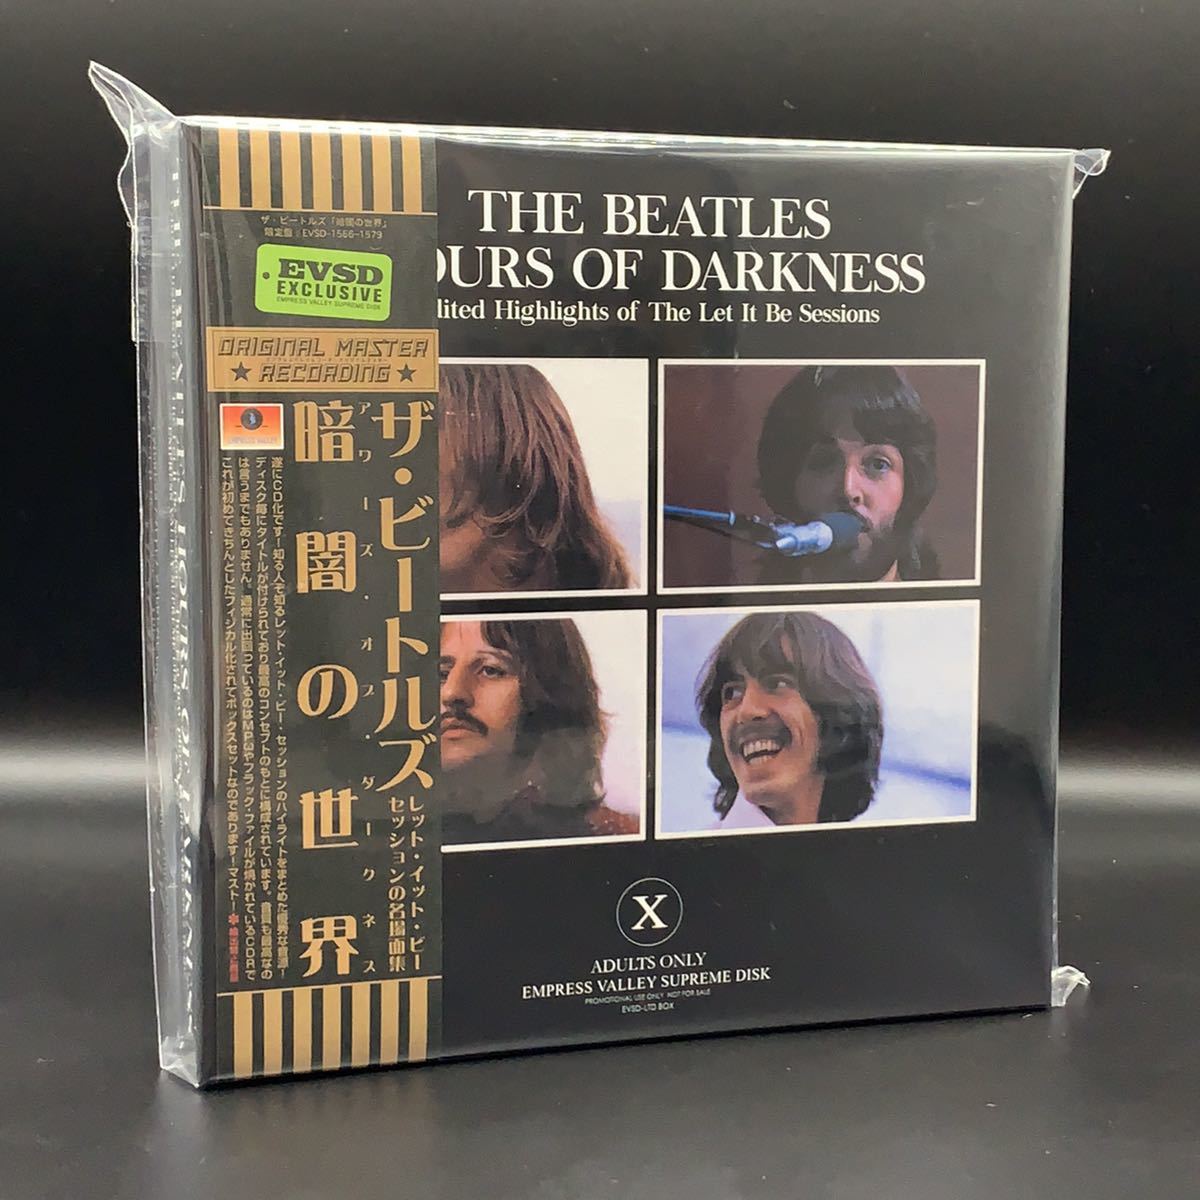 THE BEATLES / THE HOURS OF DARKNESS 14CD BOX SET! EVSD оригинал 